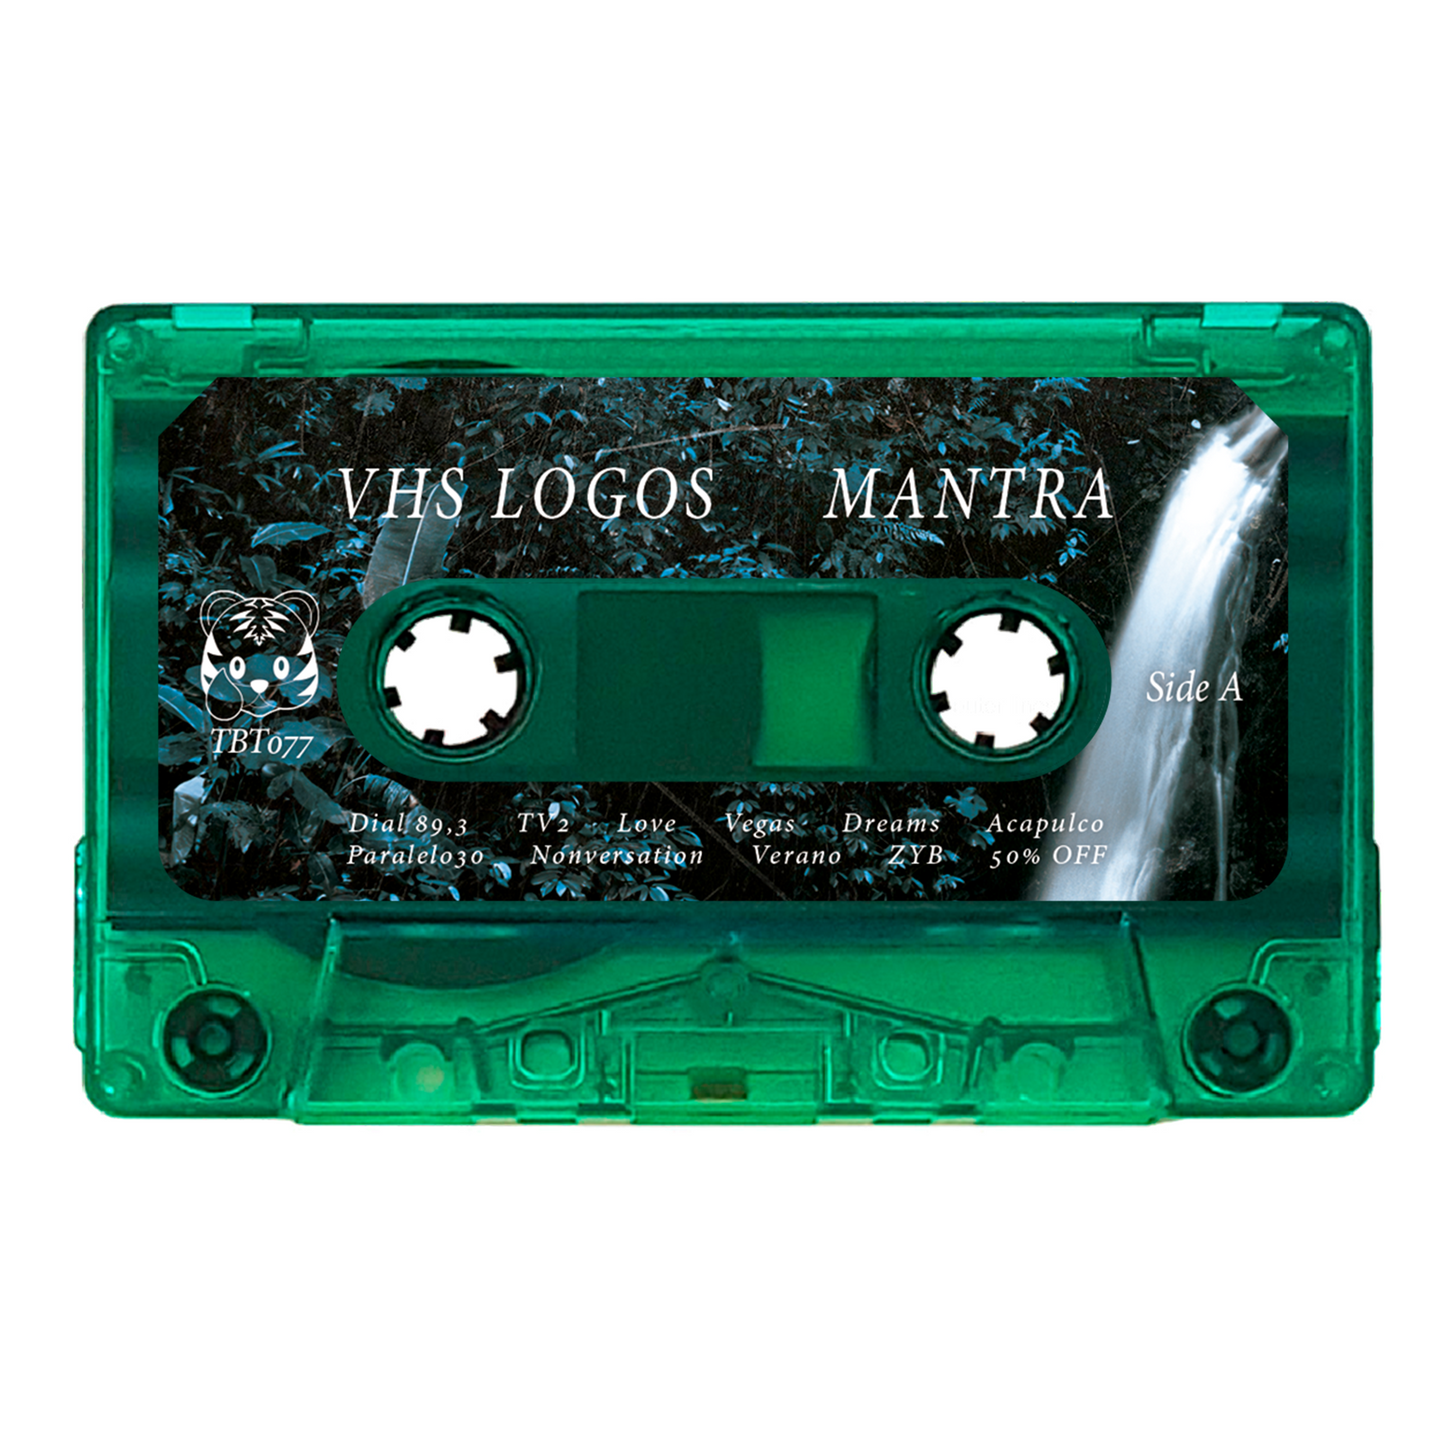 VHS LOGOS - "Mantra" Limited Edition Cassette Tape